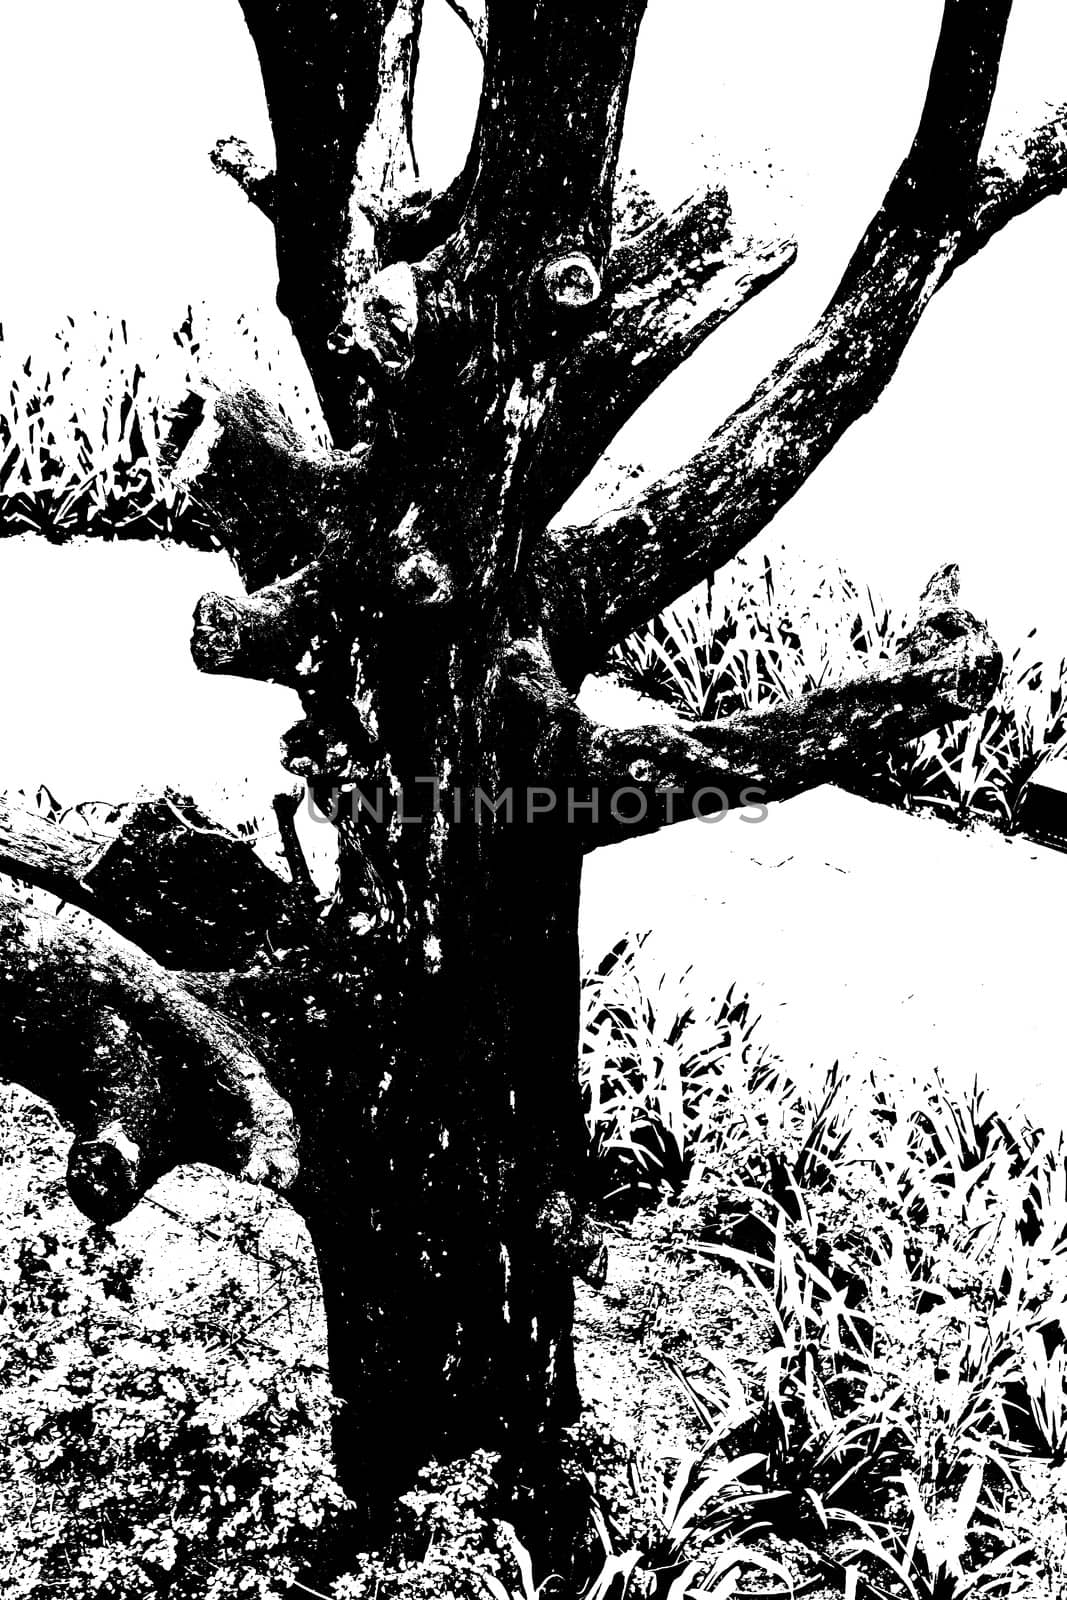 Generic portrait of a dead tree by a garden path shot from an elevated position. Rendered photograph and shot location was Goa, India